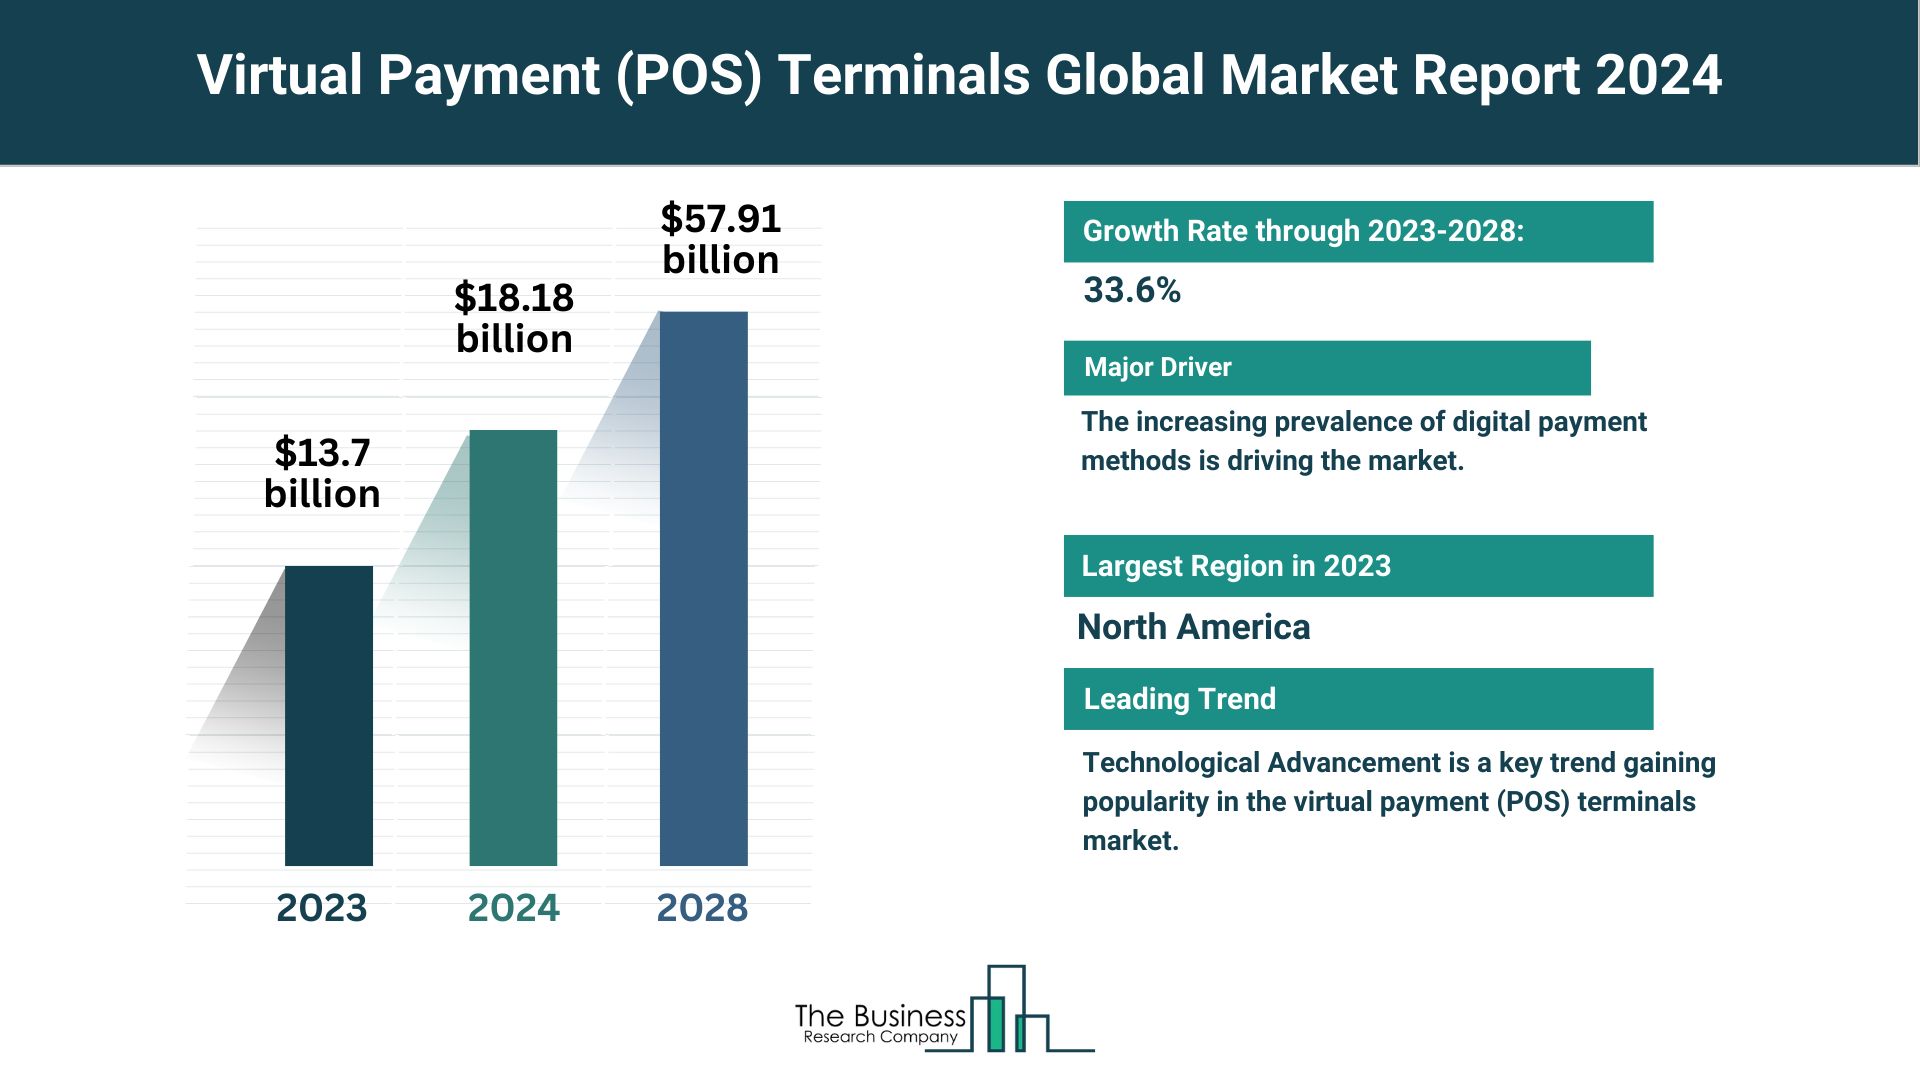 Virtual Payment (POS) Terminals Market Is Forecasted To Reach 57.91 Billion By 2028 At A CAGR Of 33.6%